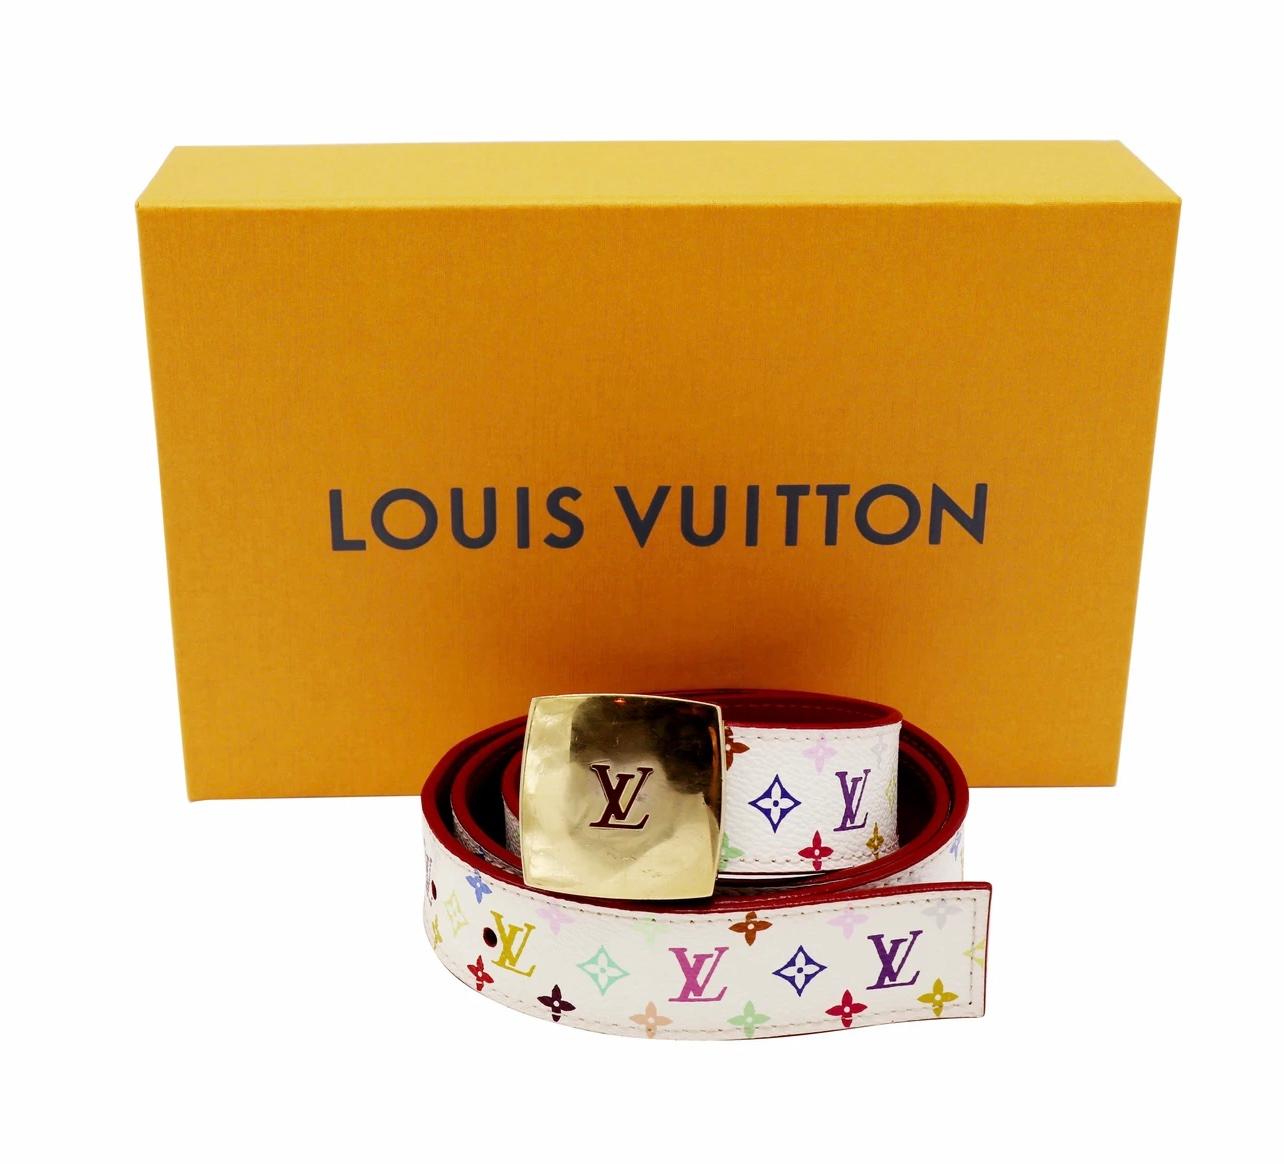 This Louis Vuitton belt is from the 2003 collection and is made of coated canvas. The belt features white coated canvas with multicolour monogram, gold Tony buckle and red leather trim and back side.

MATERIAL: Coated canvas
ITEM CODE: white with